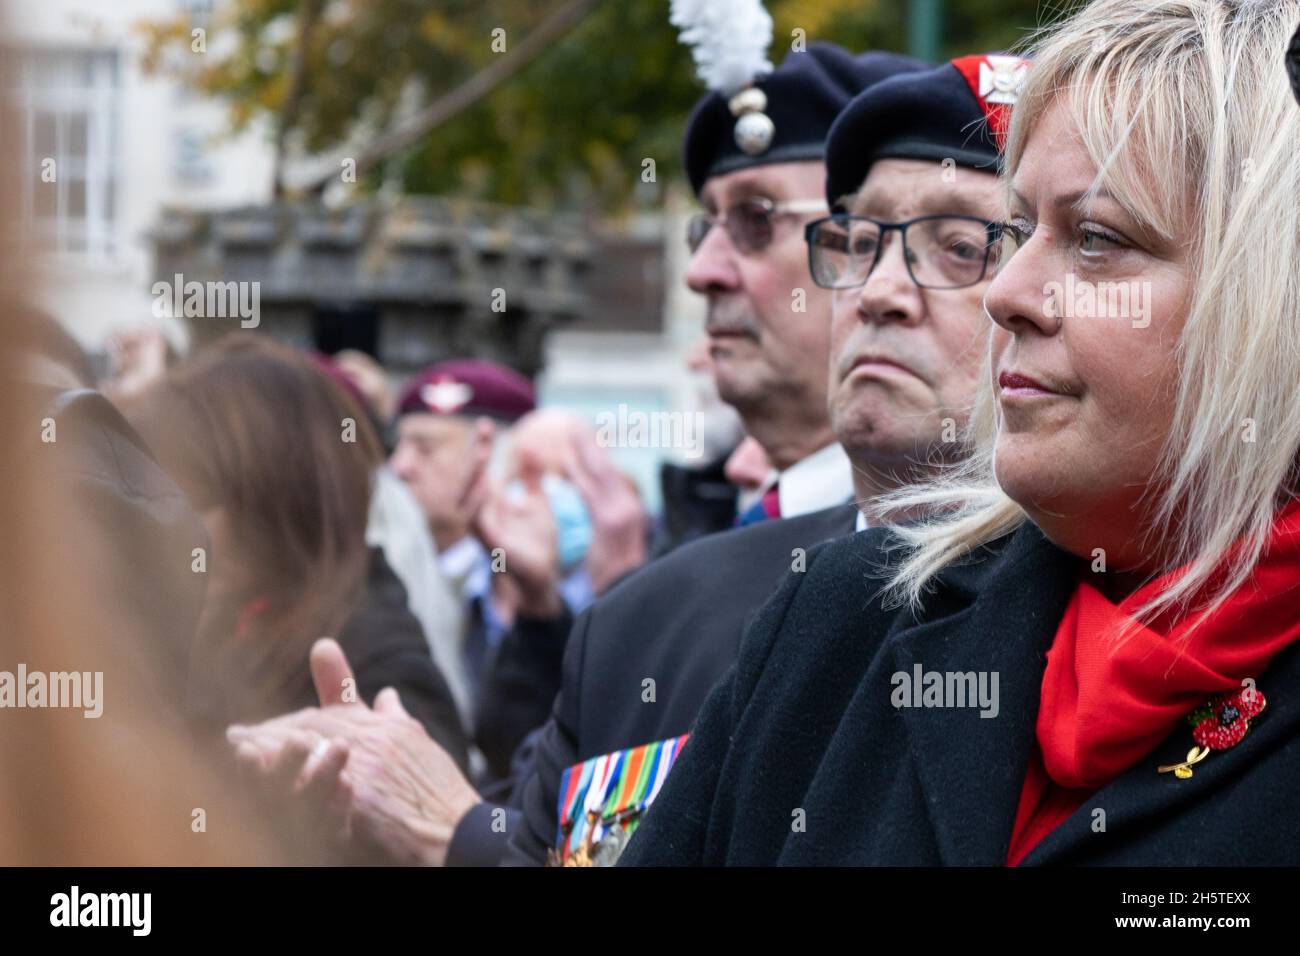 Dennis Hutchings Funeral 11/11/2021 British Soldier, veterans and mourners looking sad Stock Photo